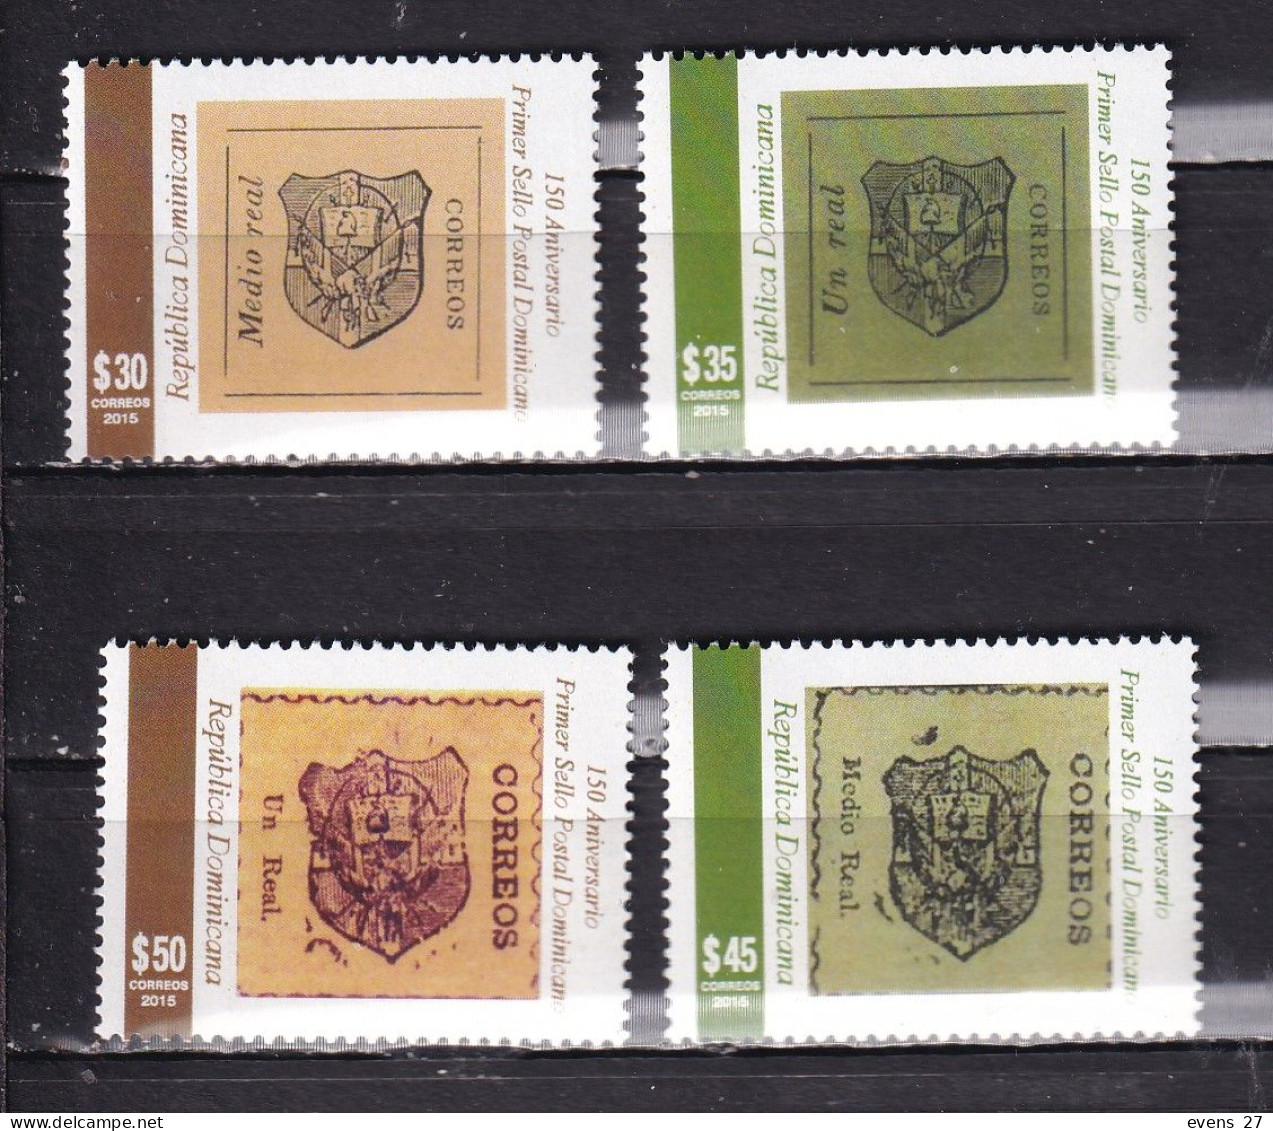 DOMINICAN REPUBLIC 2015-STAMPS ON STAMPS-MNH, - Dominican Republic